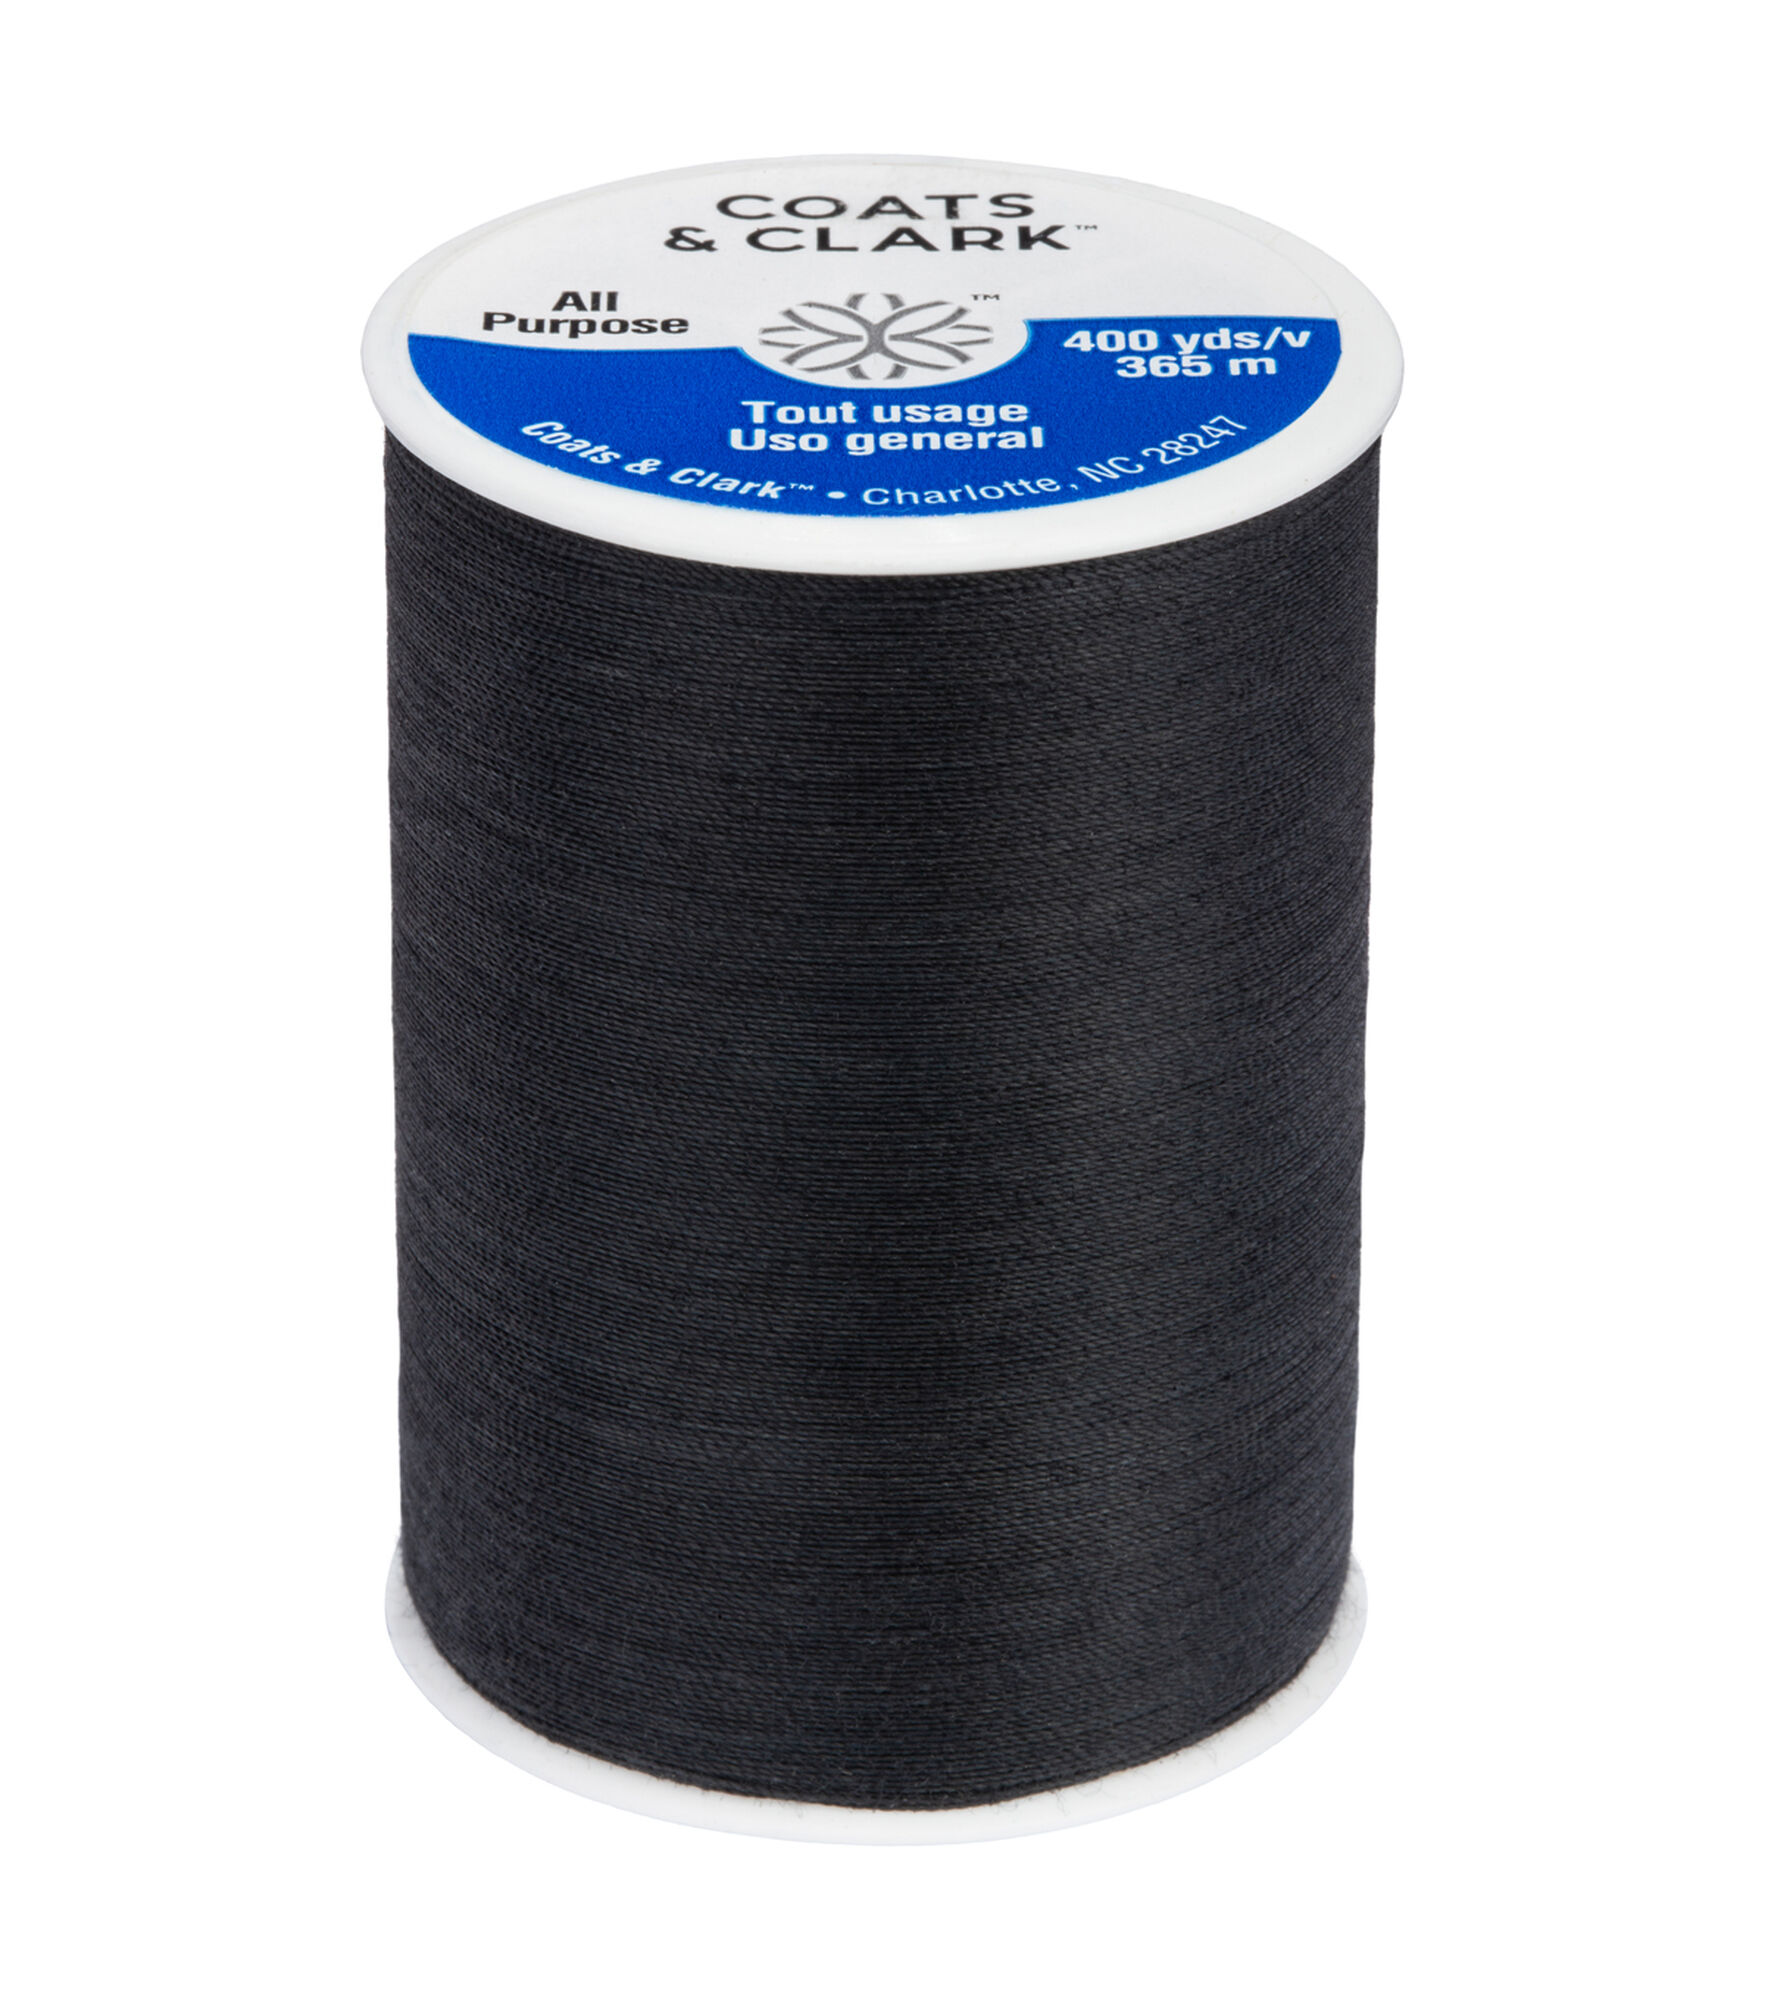 24 Full Size Assorted Spools of Thread Full Size 200 Yards Each